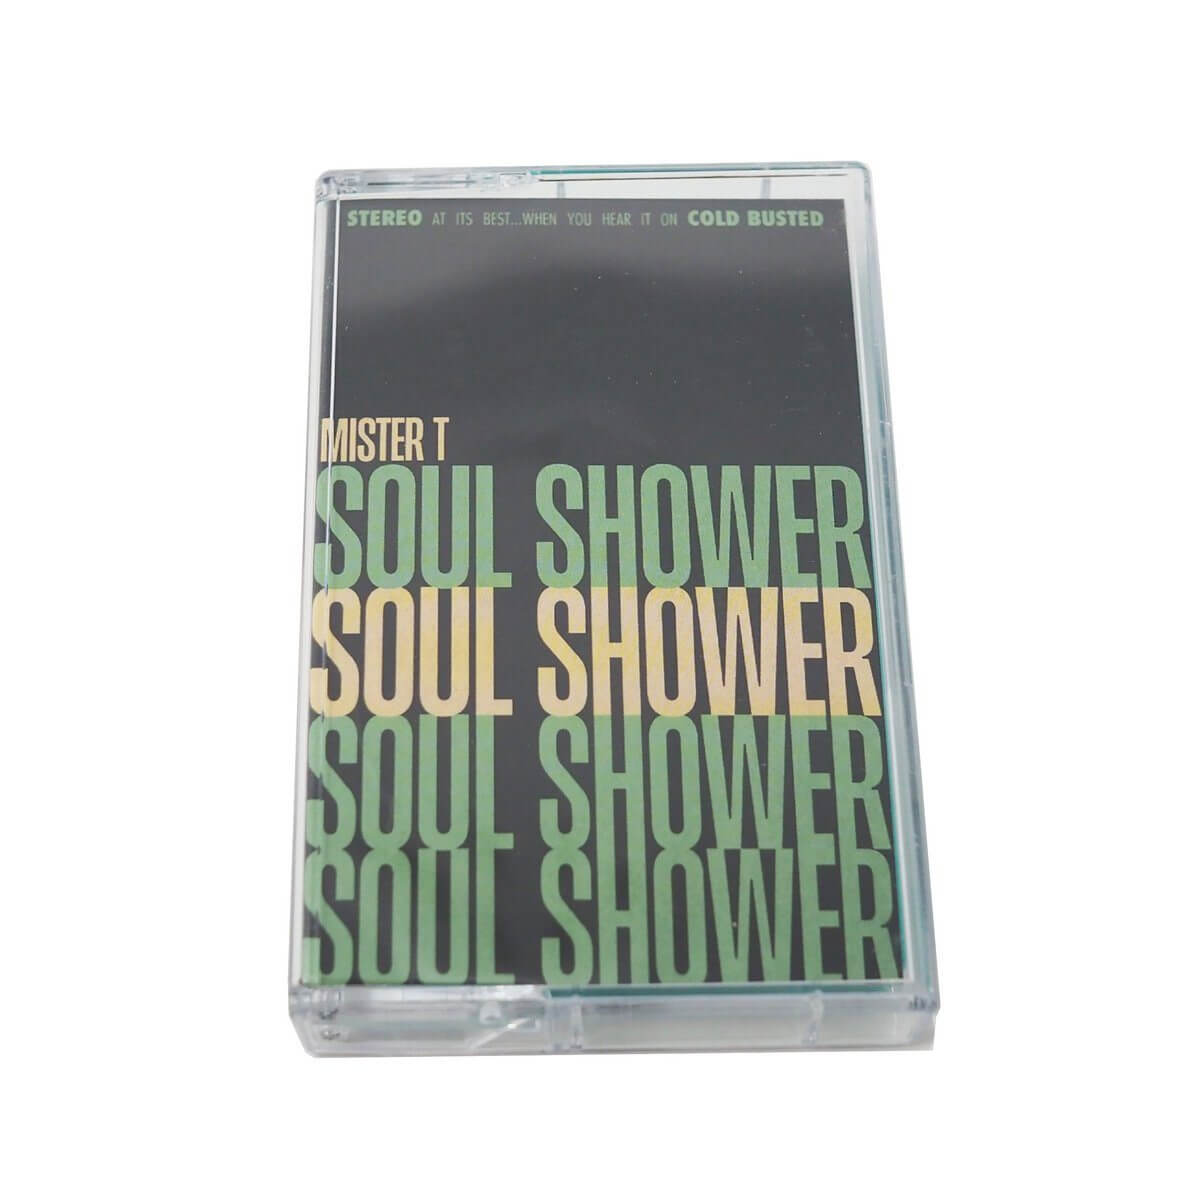 Mister T. - Soul Shower - Limited Edition Cassette - Cold Busted